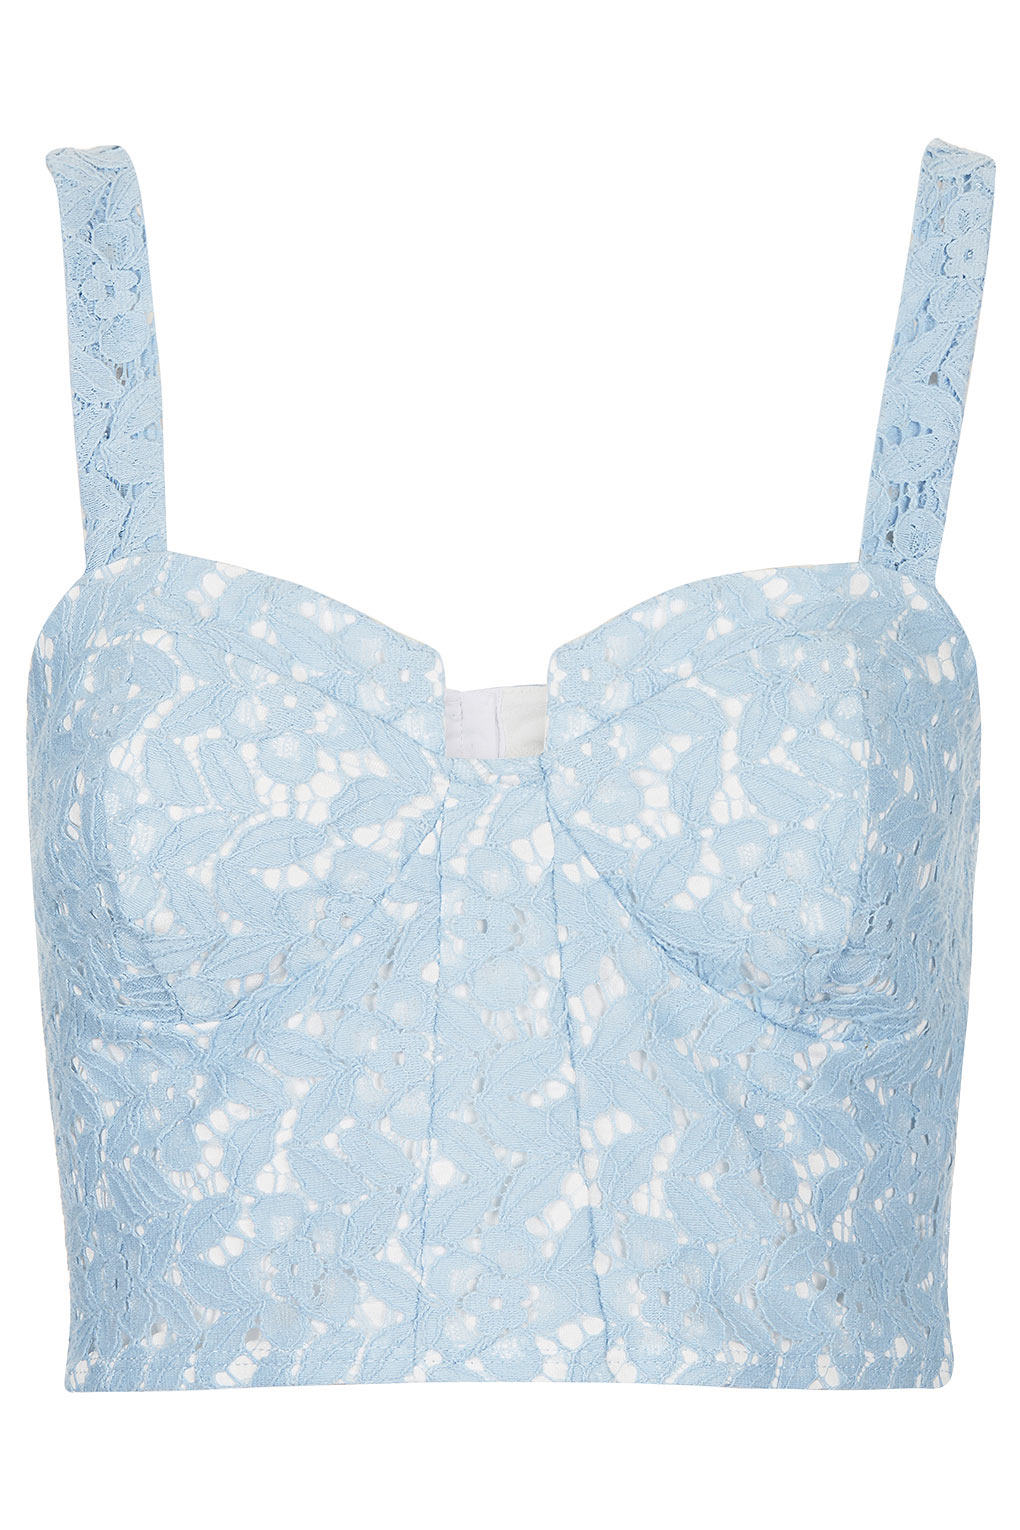 TOPSHOP Lace Corset Bralet Top in Blue - Lyst